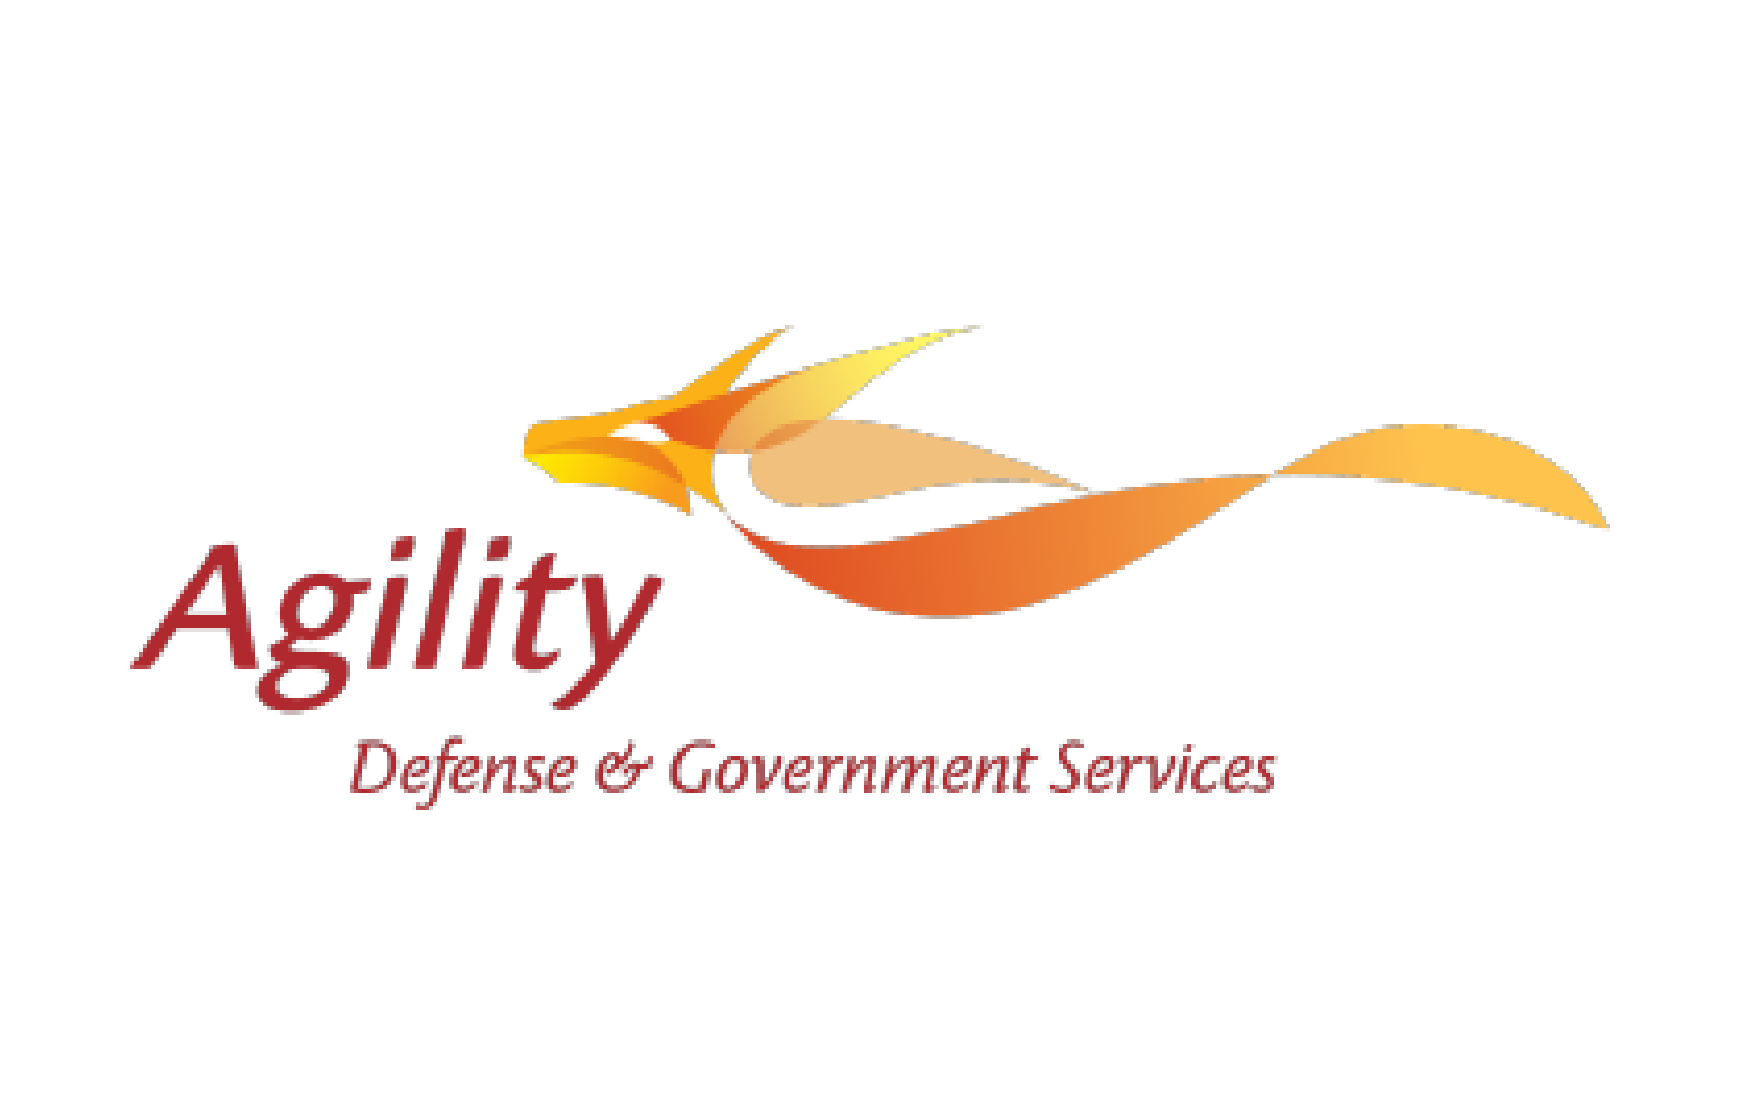 Logo of the company Agility who is a client of Precision Talent Solutions.